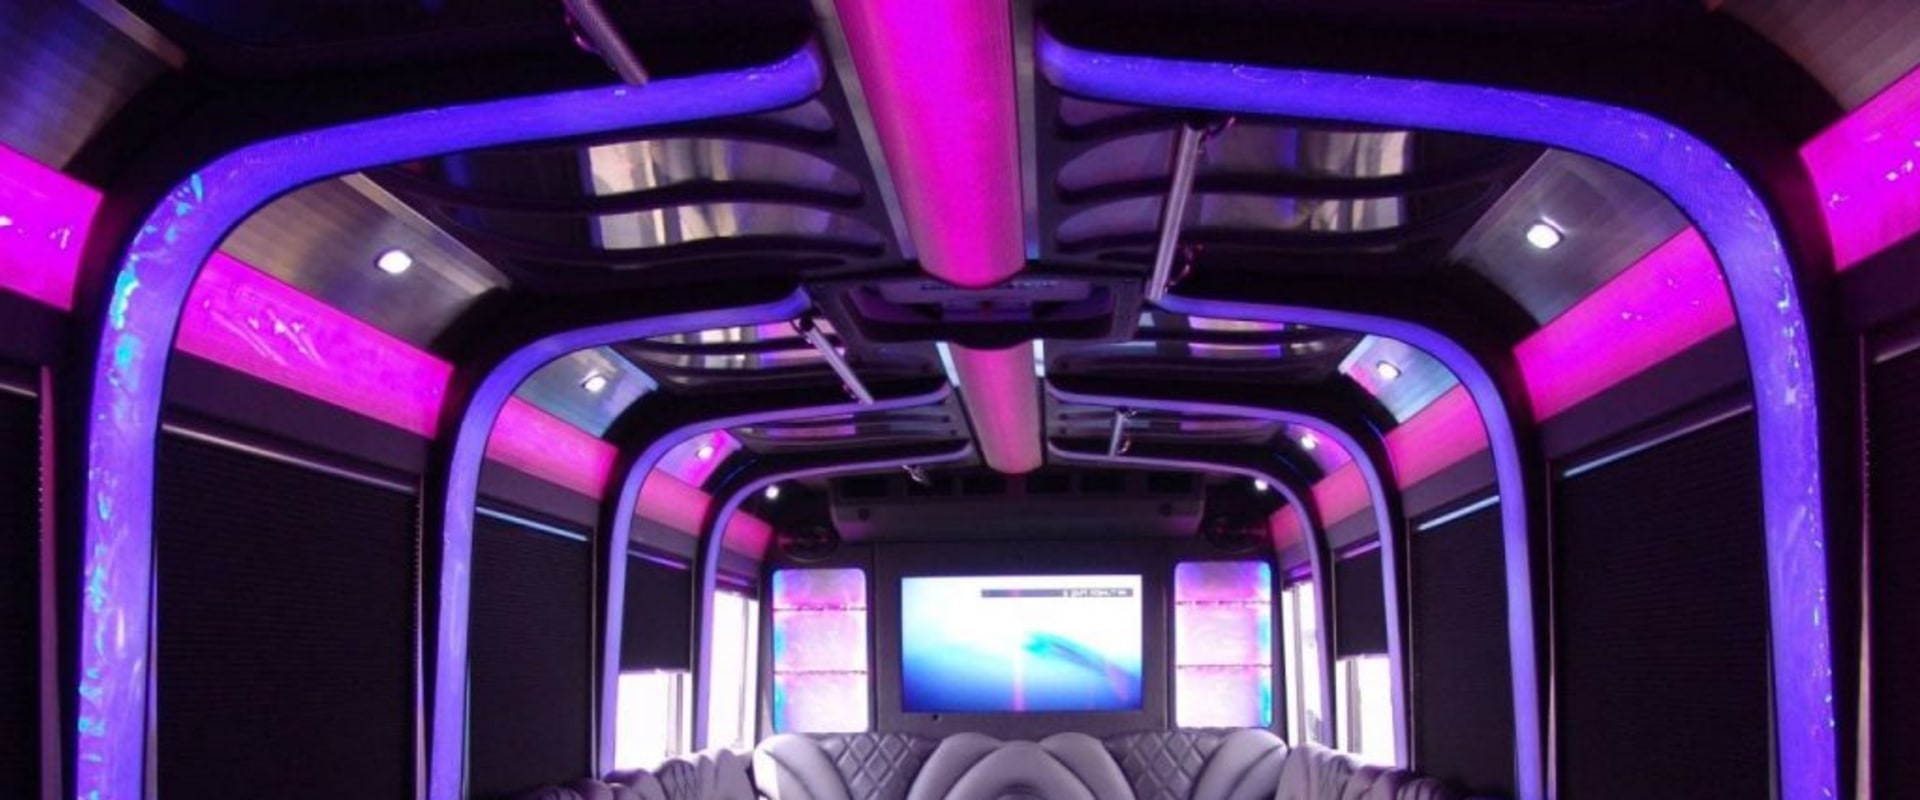 How much is a party bus in fort worth?